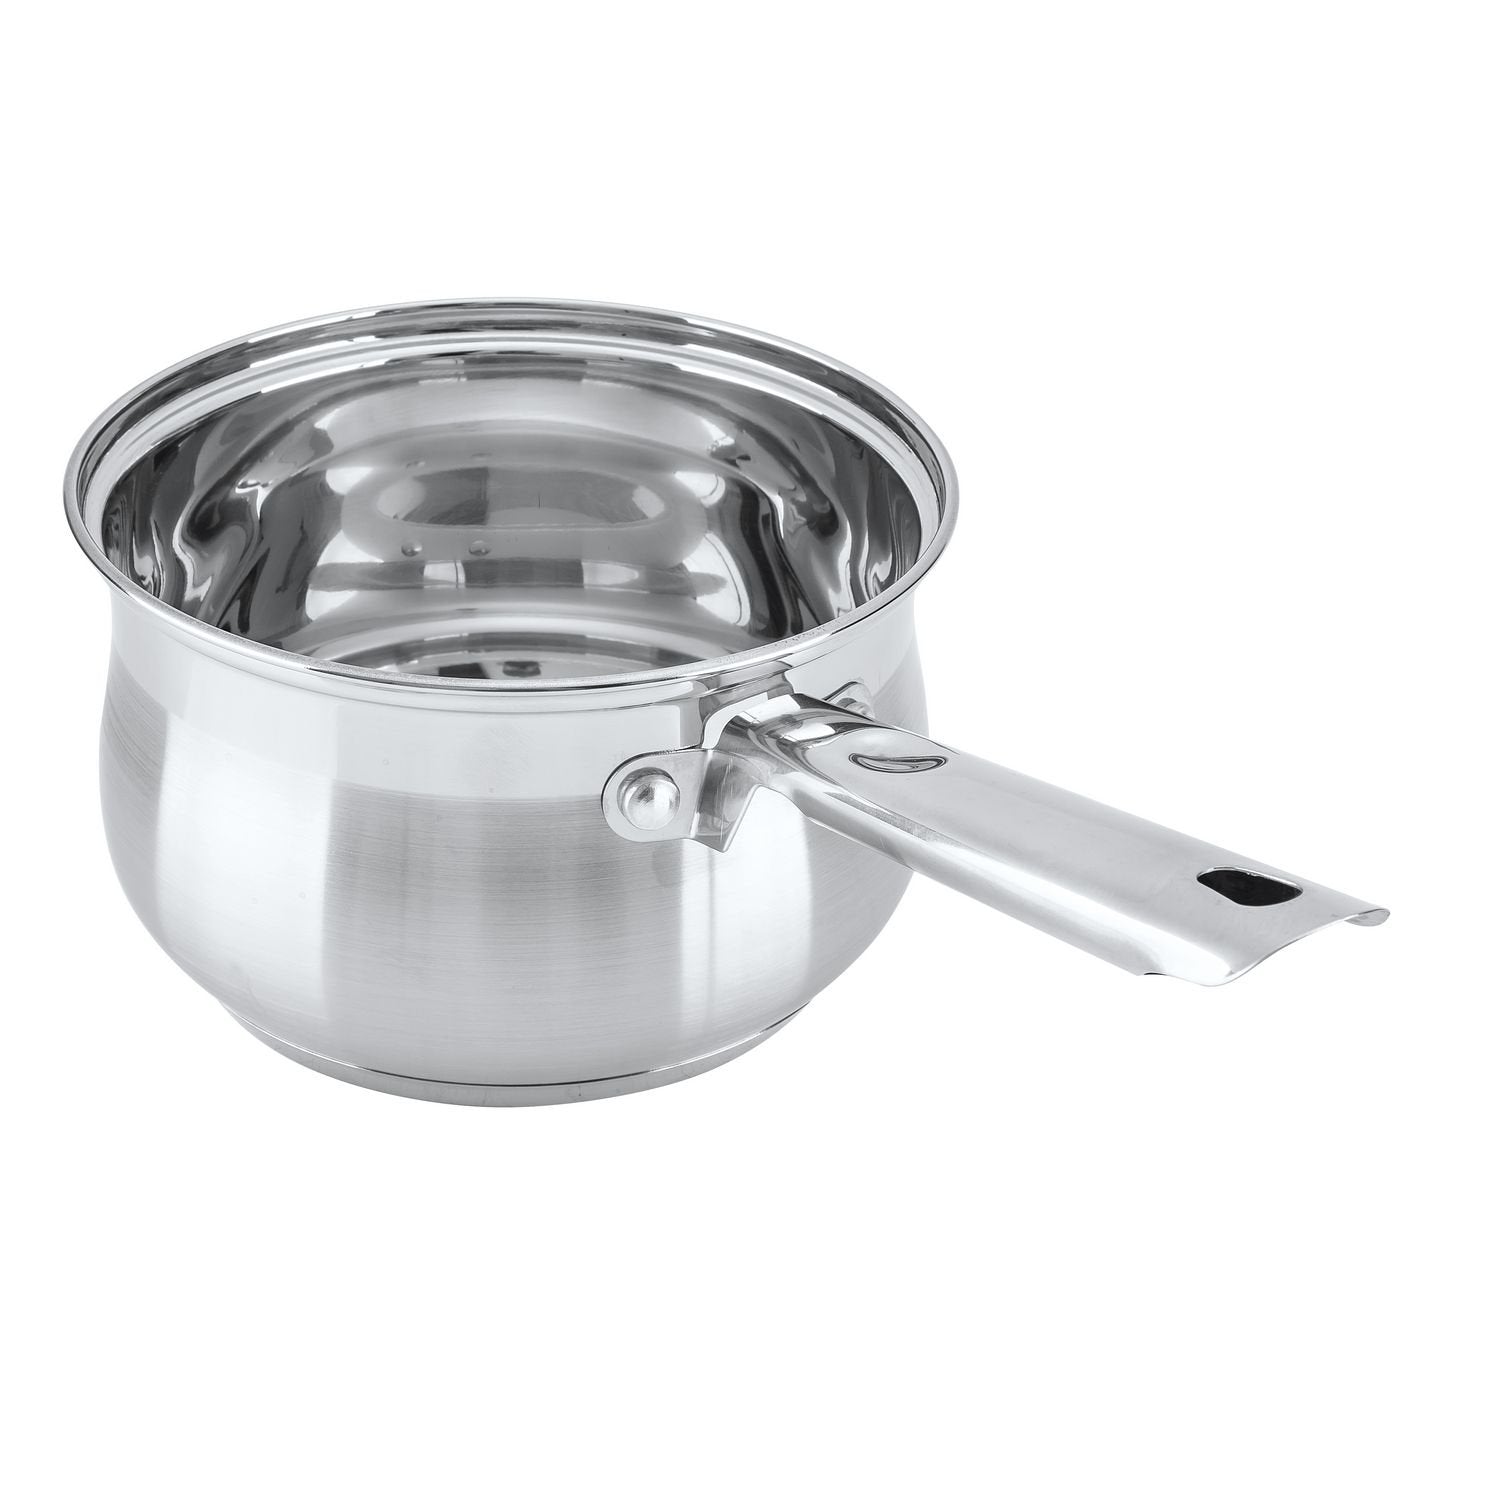  Alpine Cuisine Sauce Pan Stainless steel 3Qt Belly Shape with  Glass Lid & Ergonomic Handle, induction Bottom Sauce Pan, Sauce Pot with  Glass Lid for Cooking, Easy Clean & Rust Free